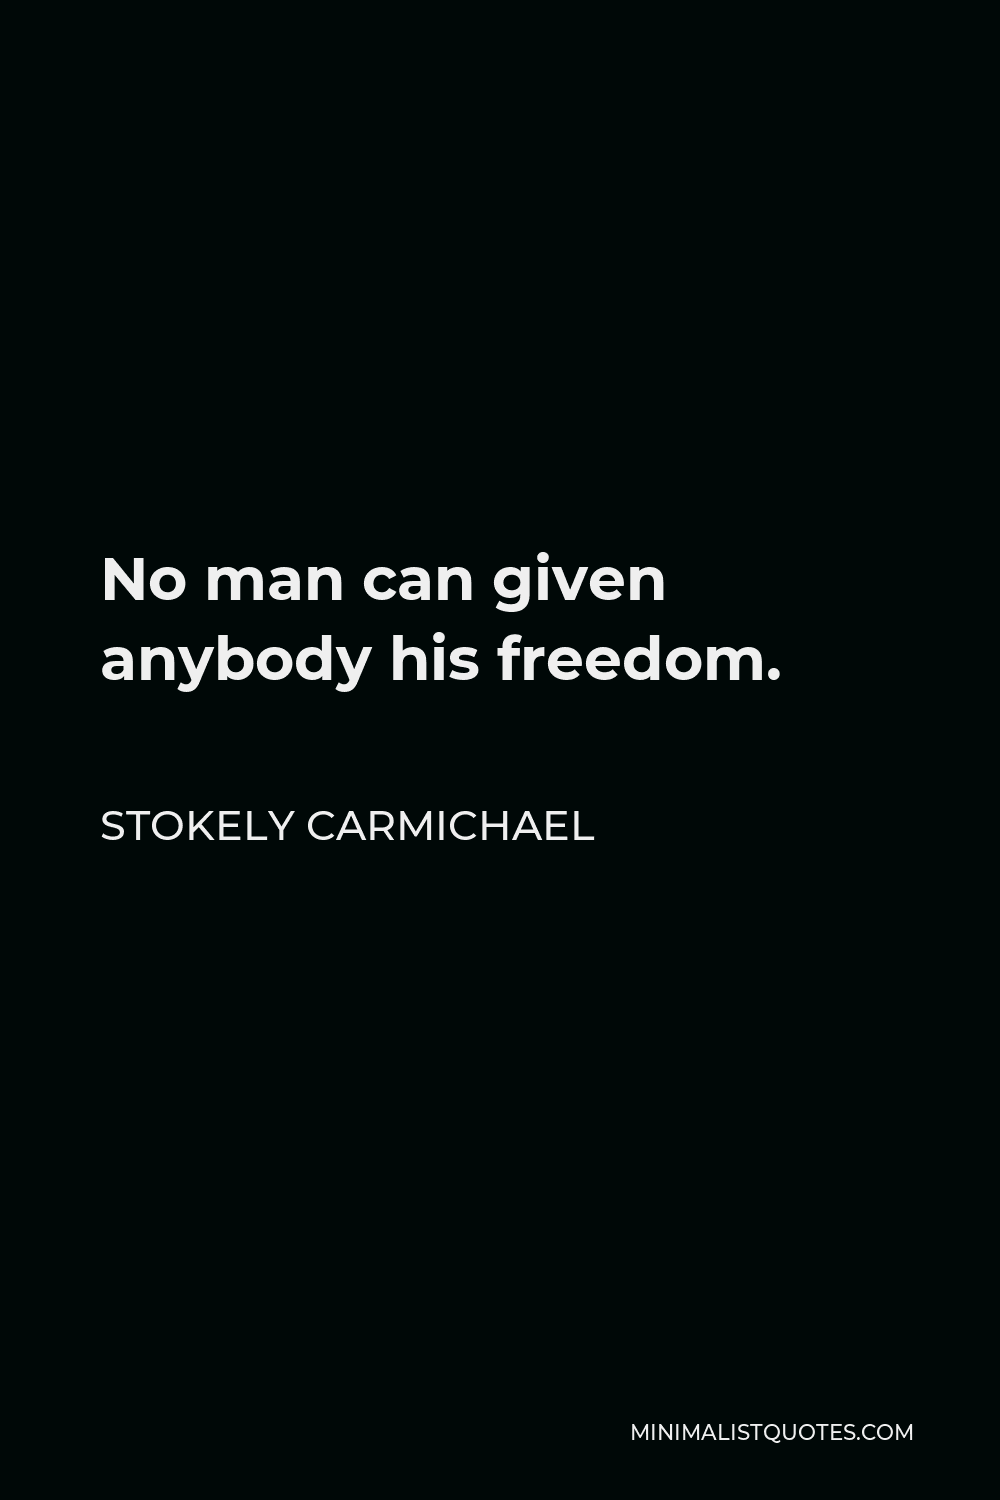 Stokely Carmichael Quote - No man can given anybody his freedom.